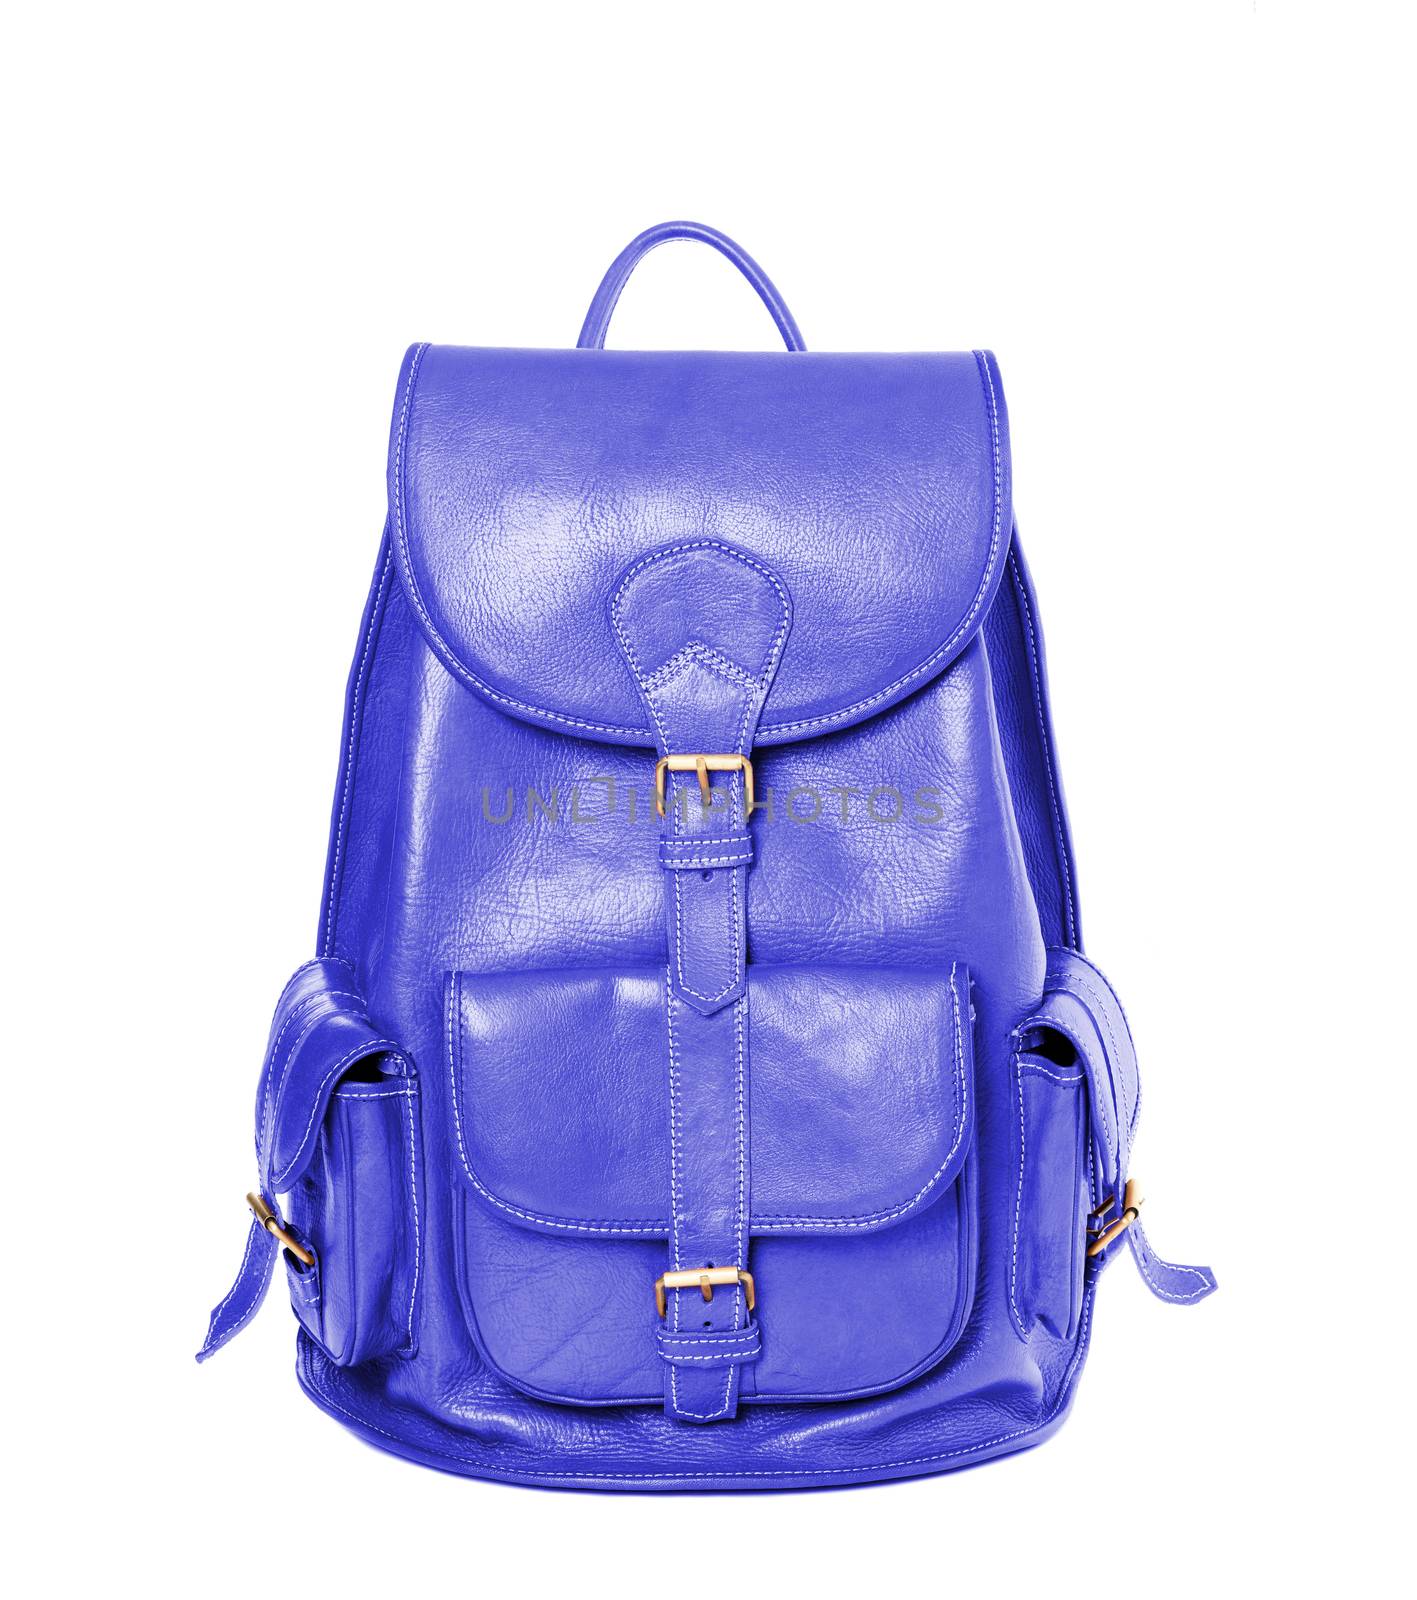 Leather backpack standing isolated on white slate blue color by Nanisimova